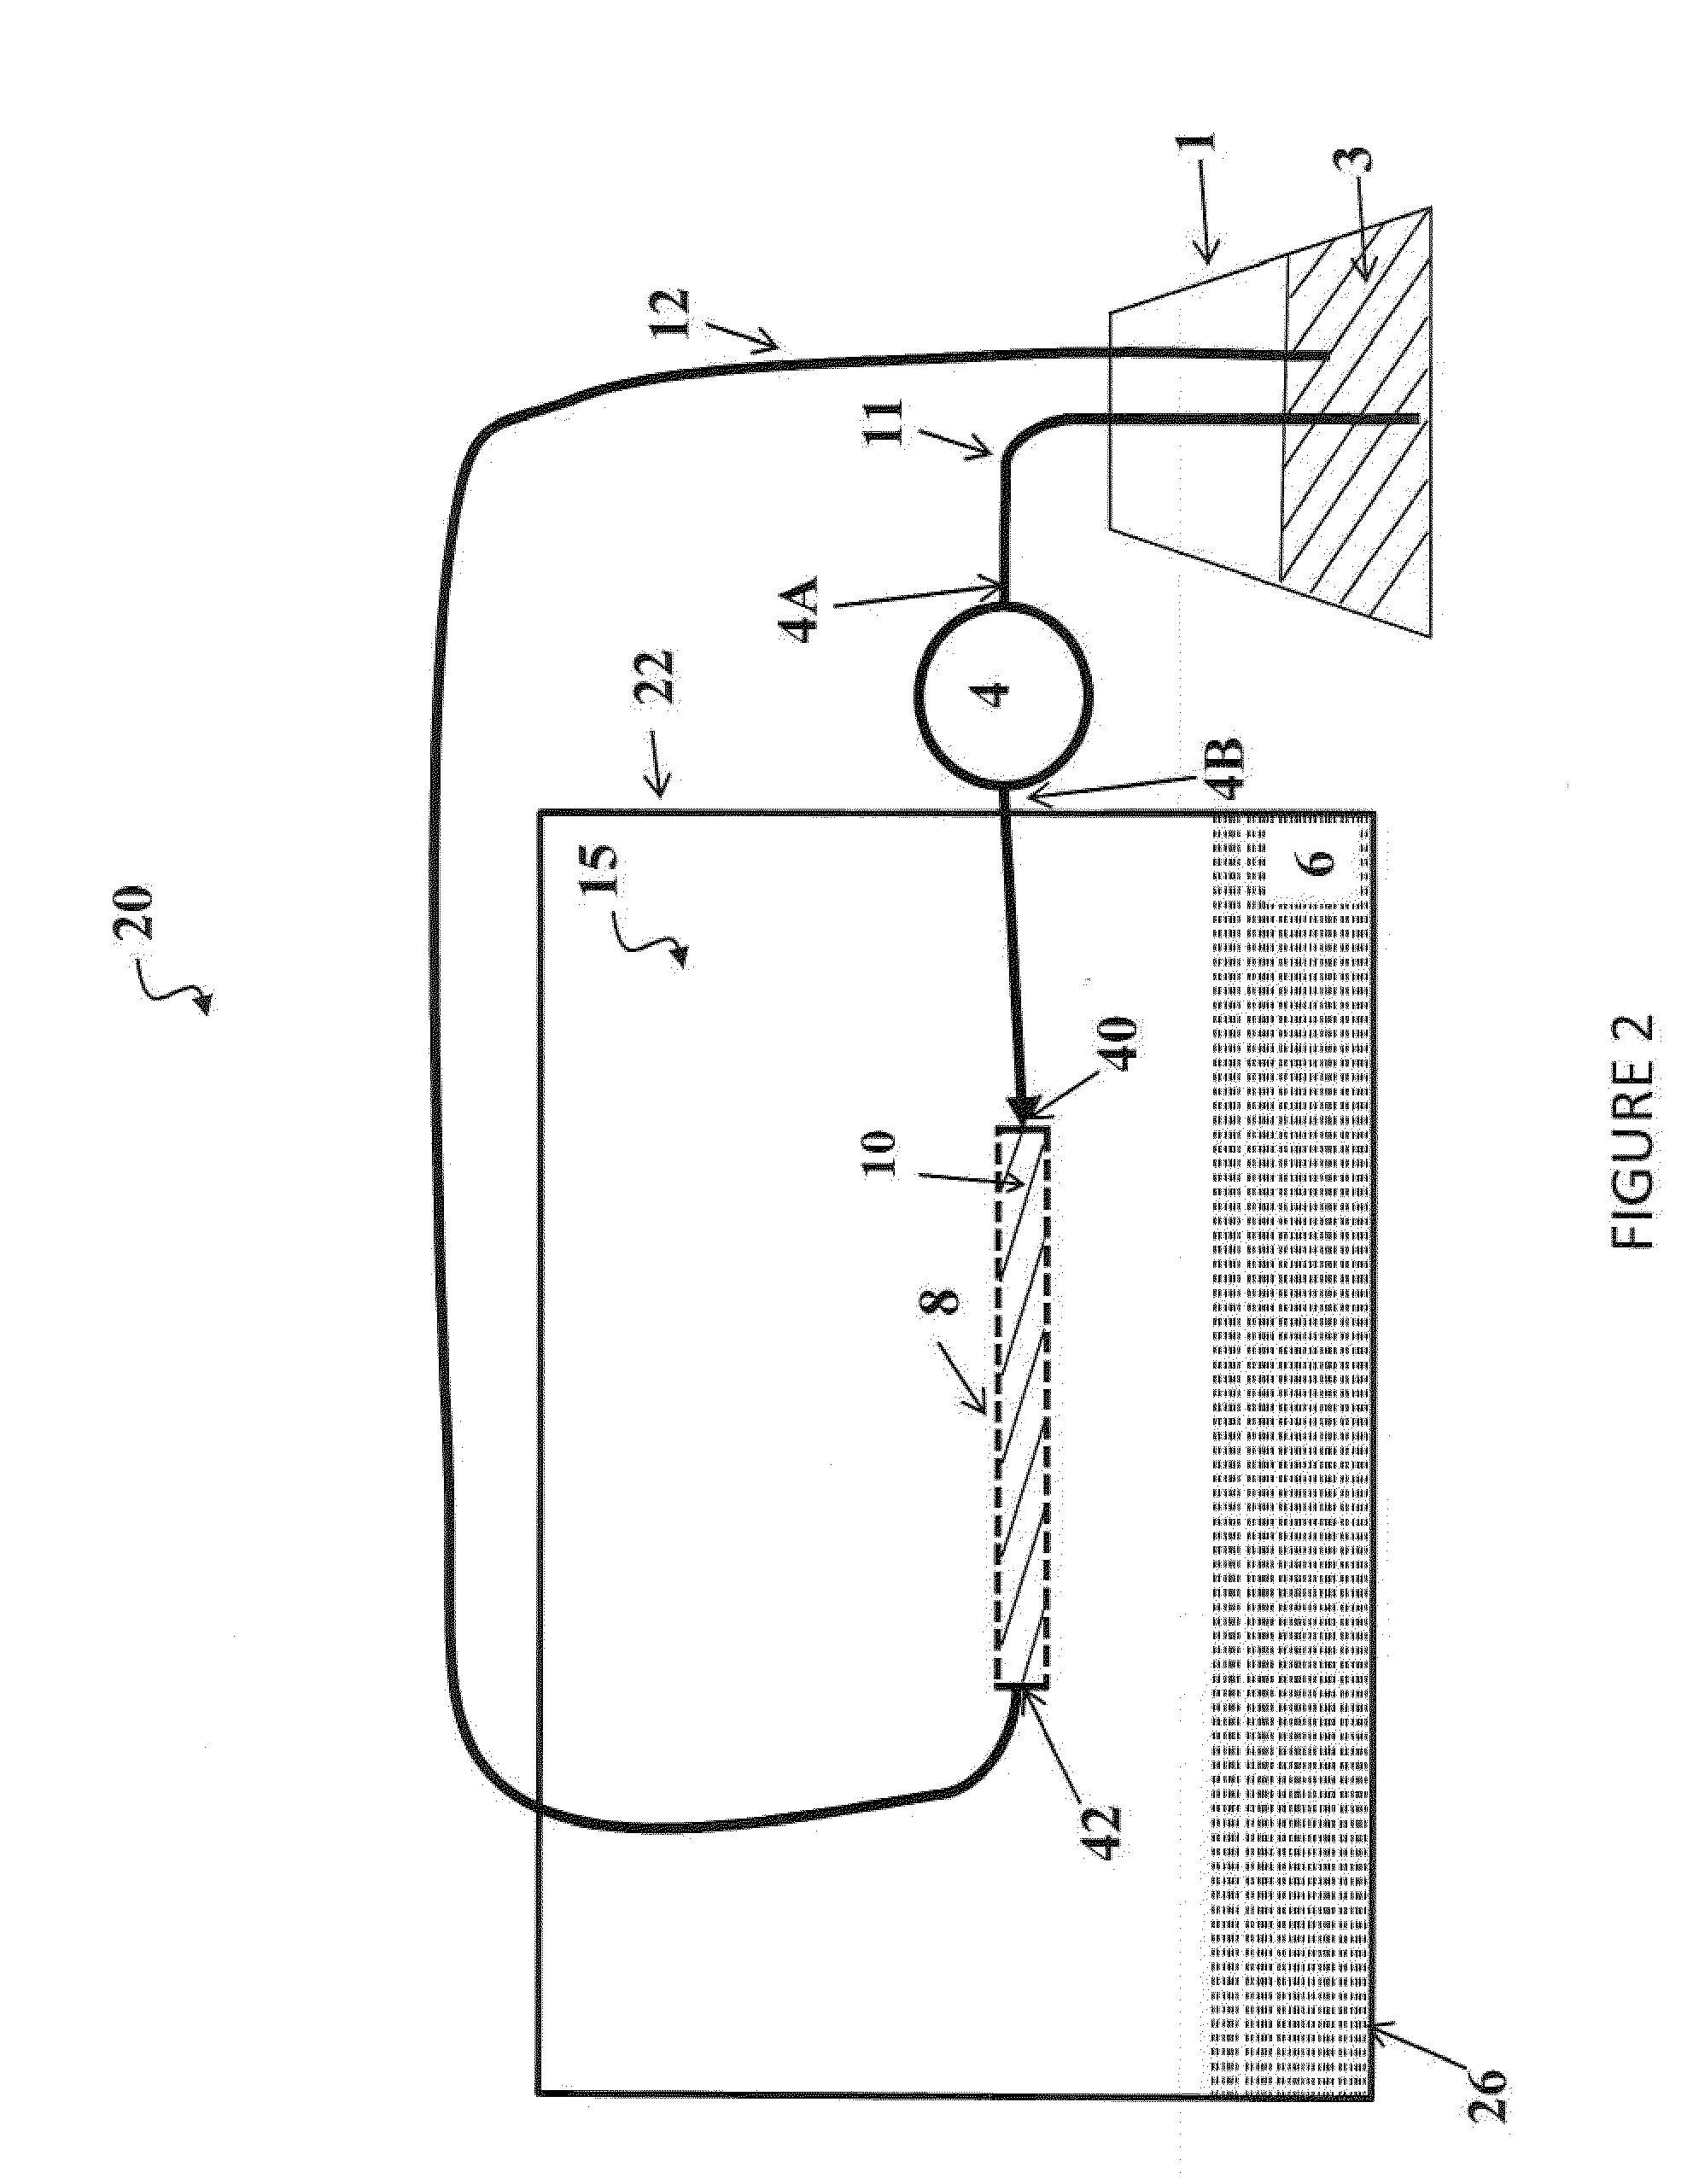 Gaseous Ammonia Removal System